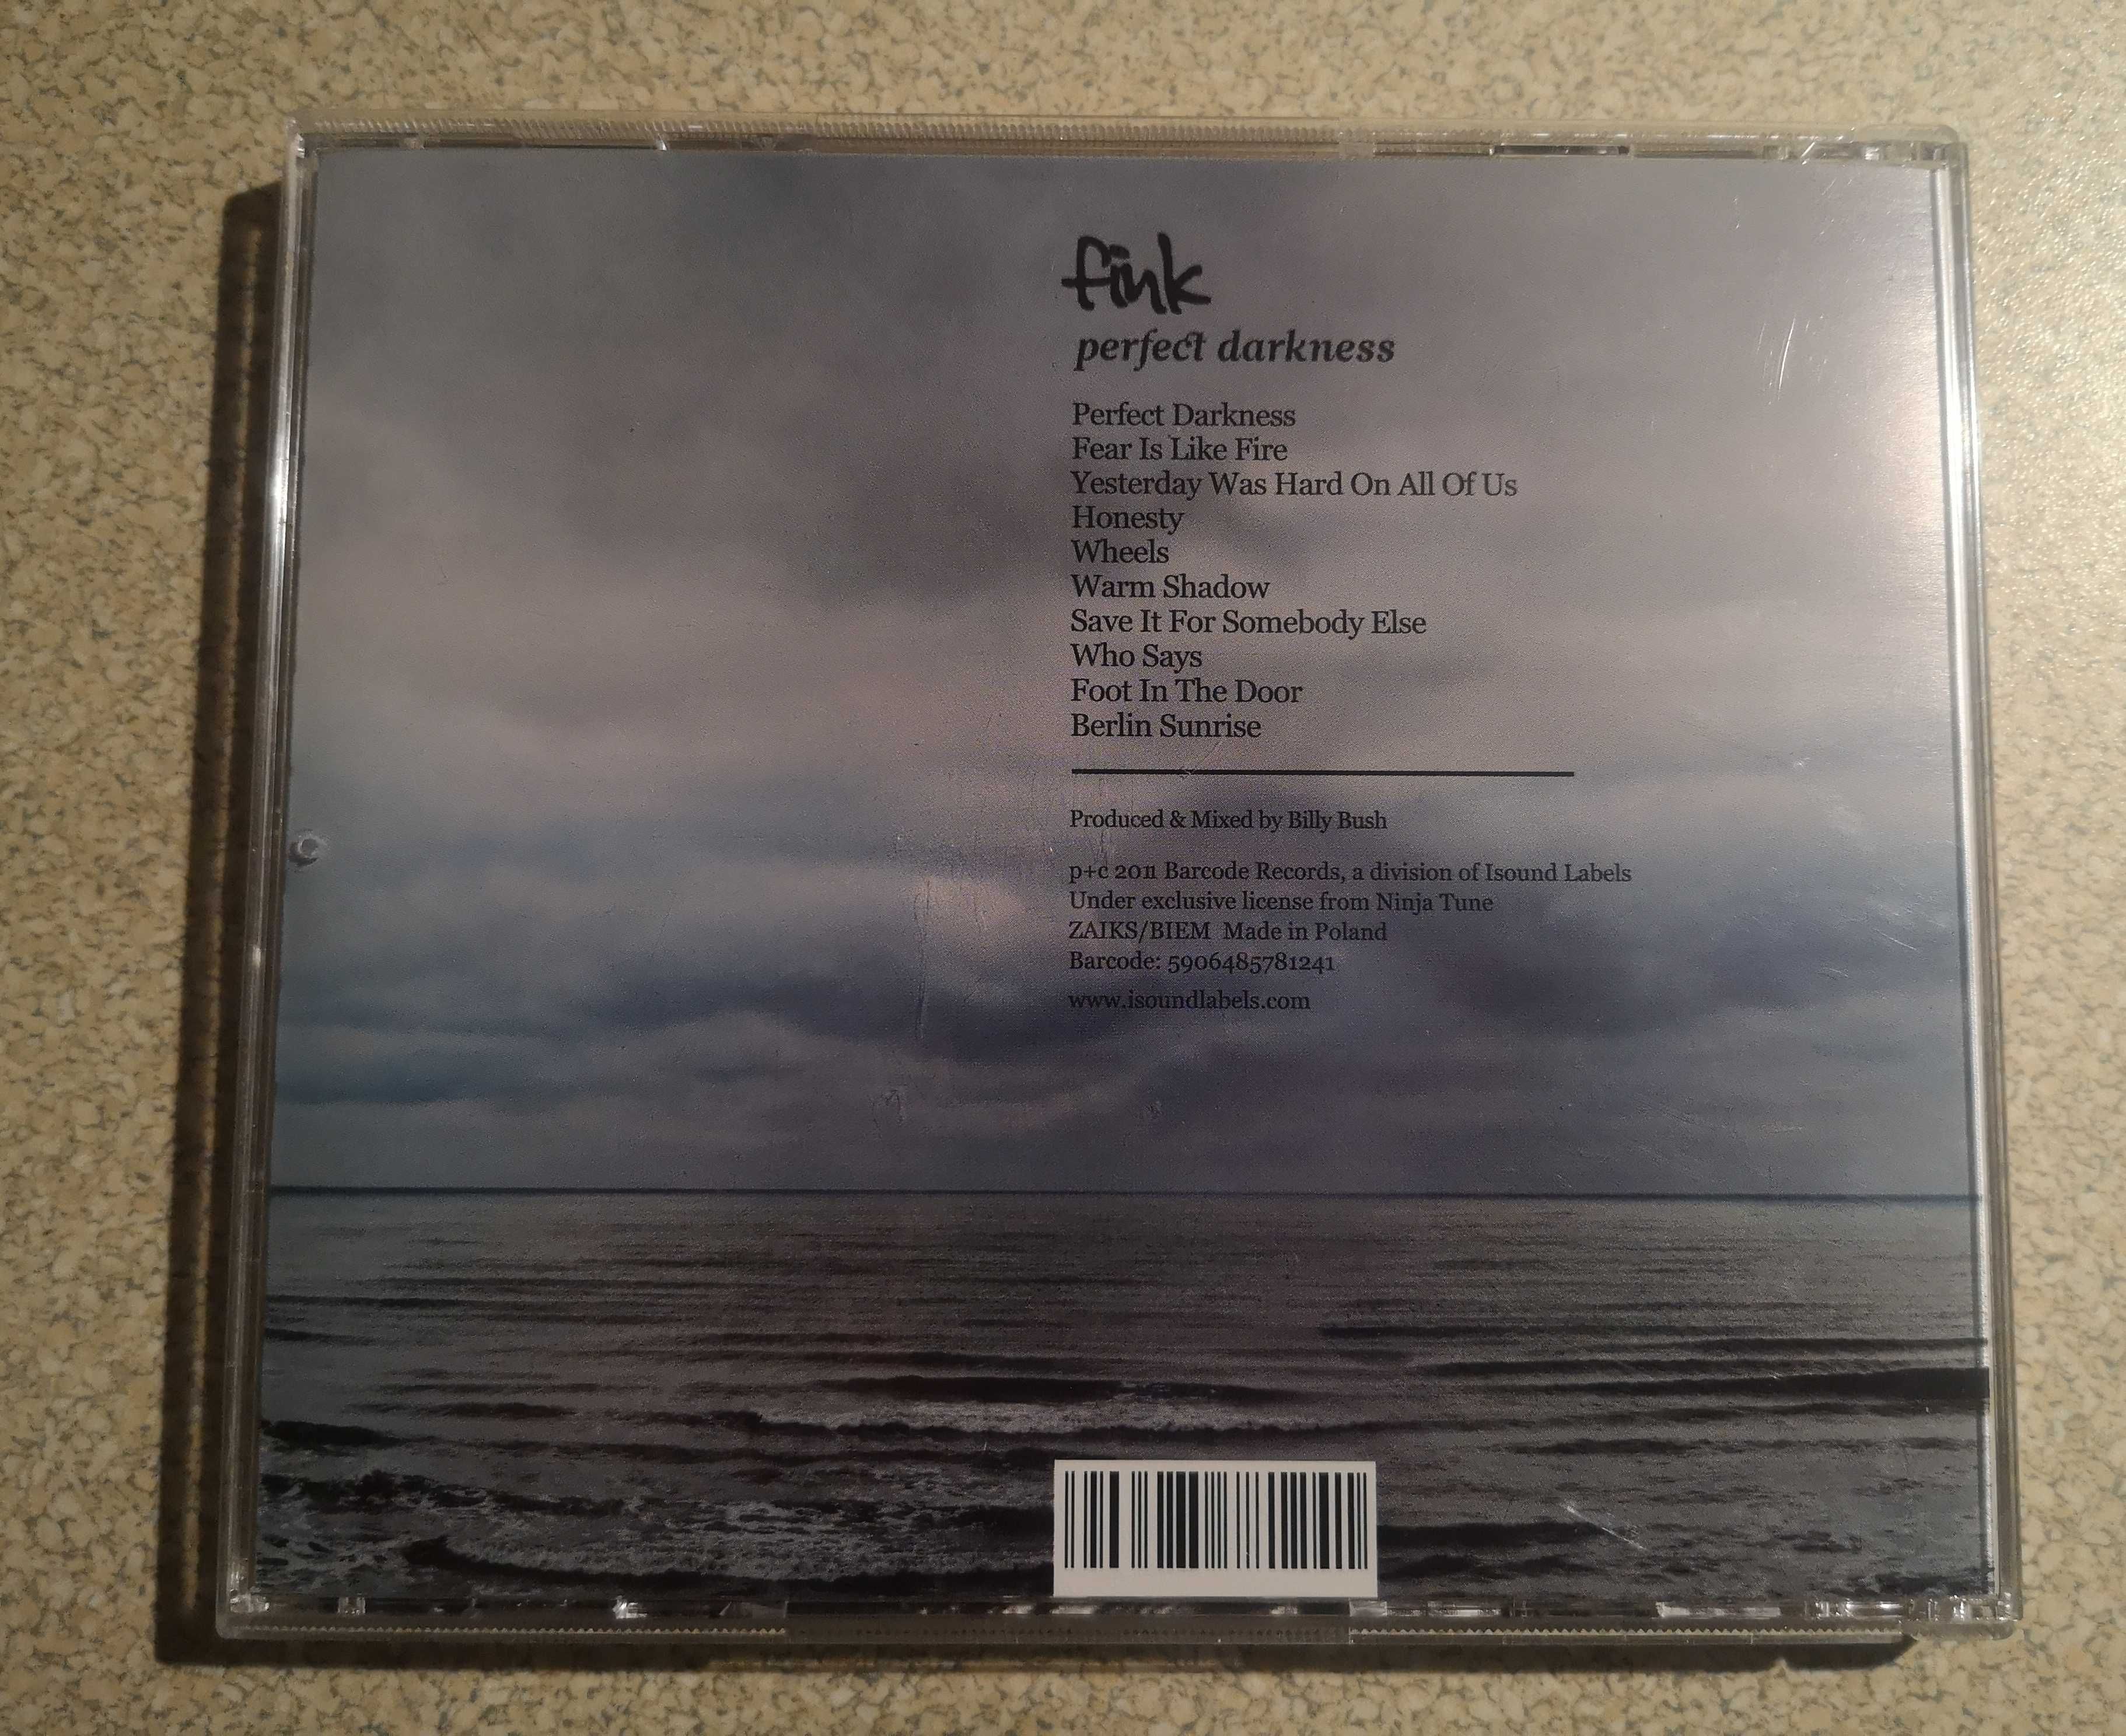 Fink - Perfect Darkness CD